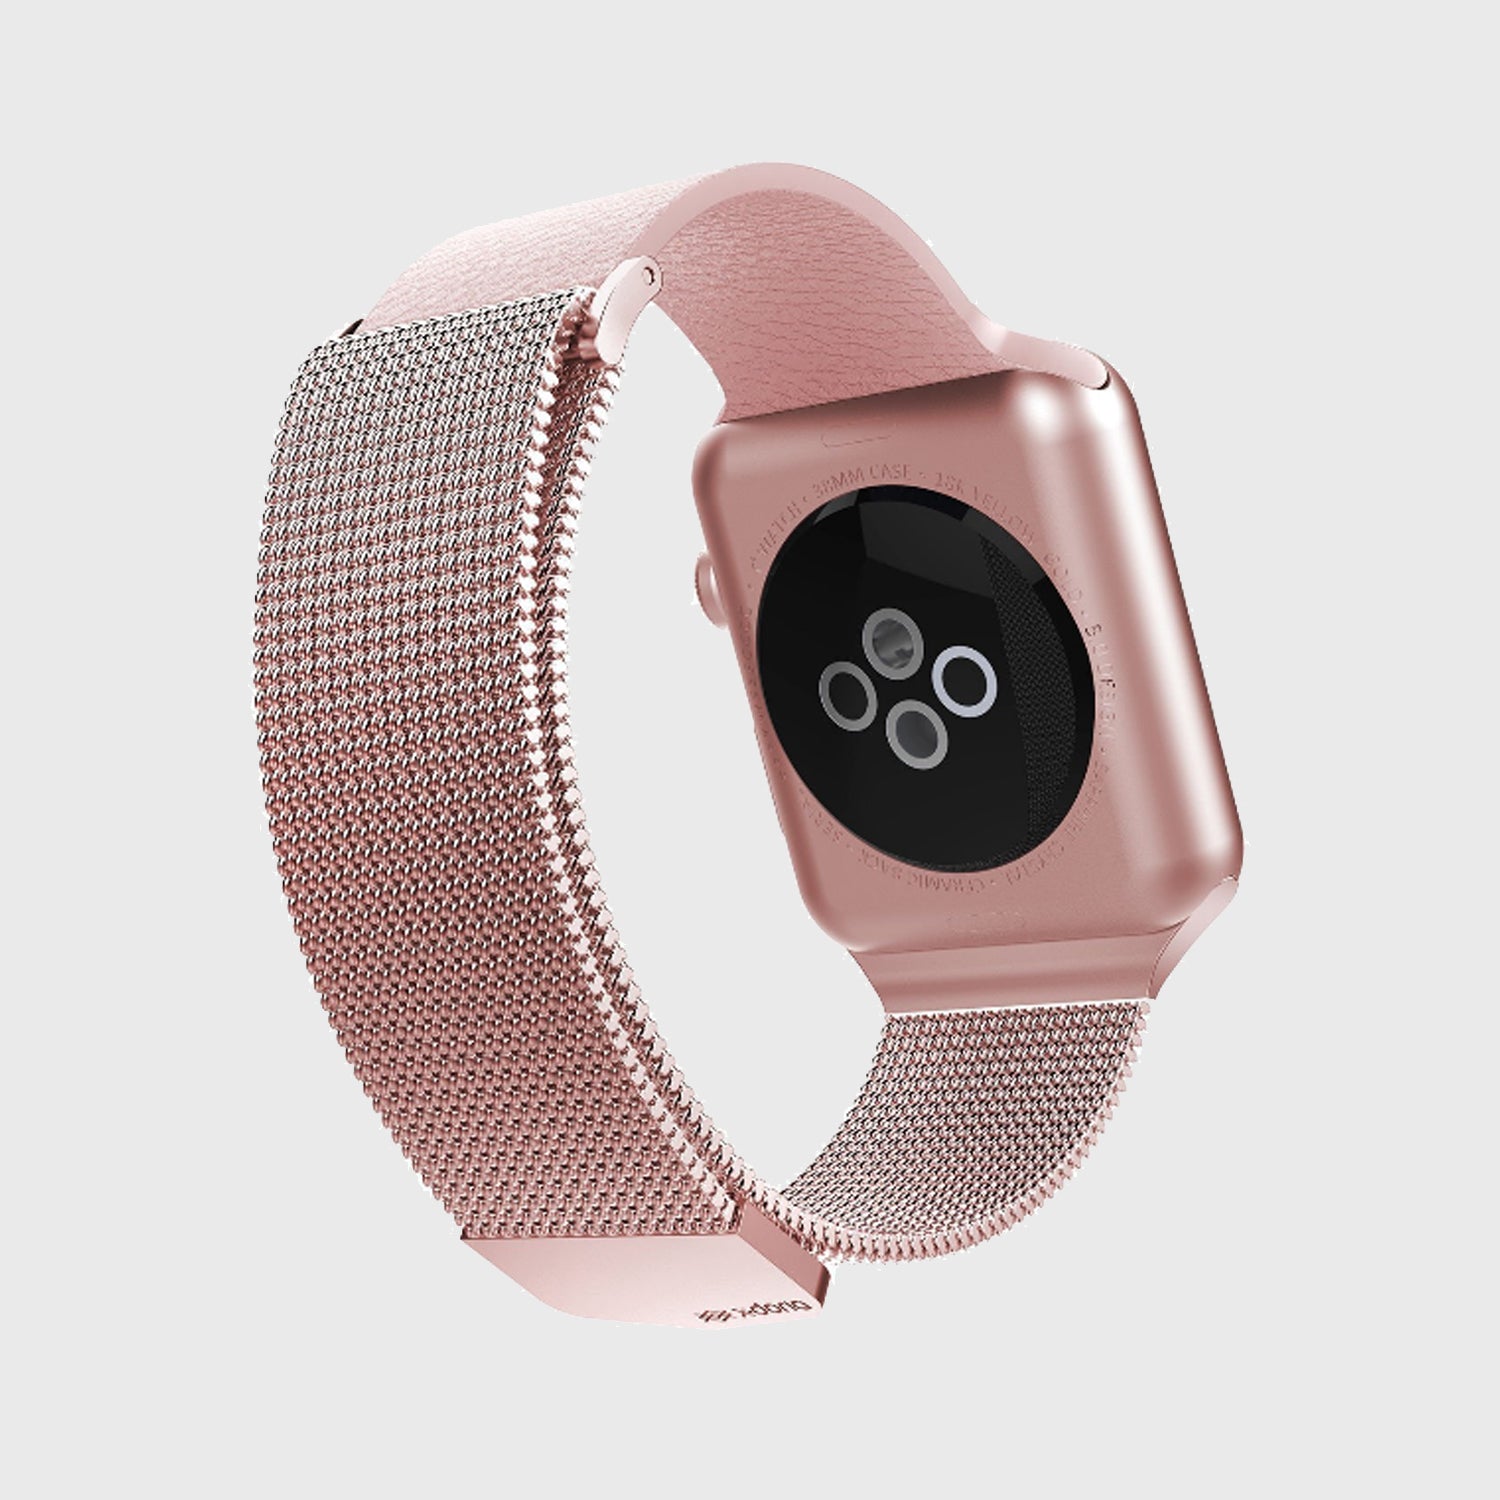 A stainless steel Raptic Apple Watch with a rose gold MESH BAND.